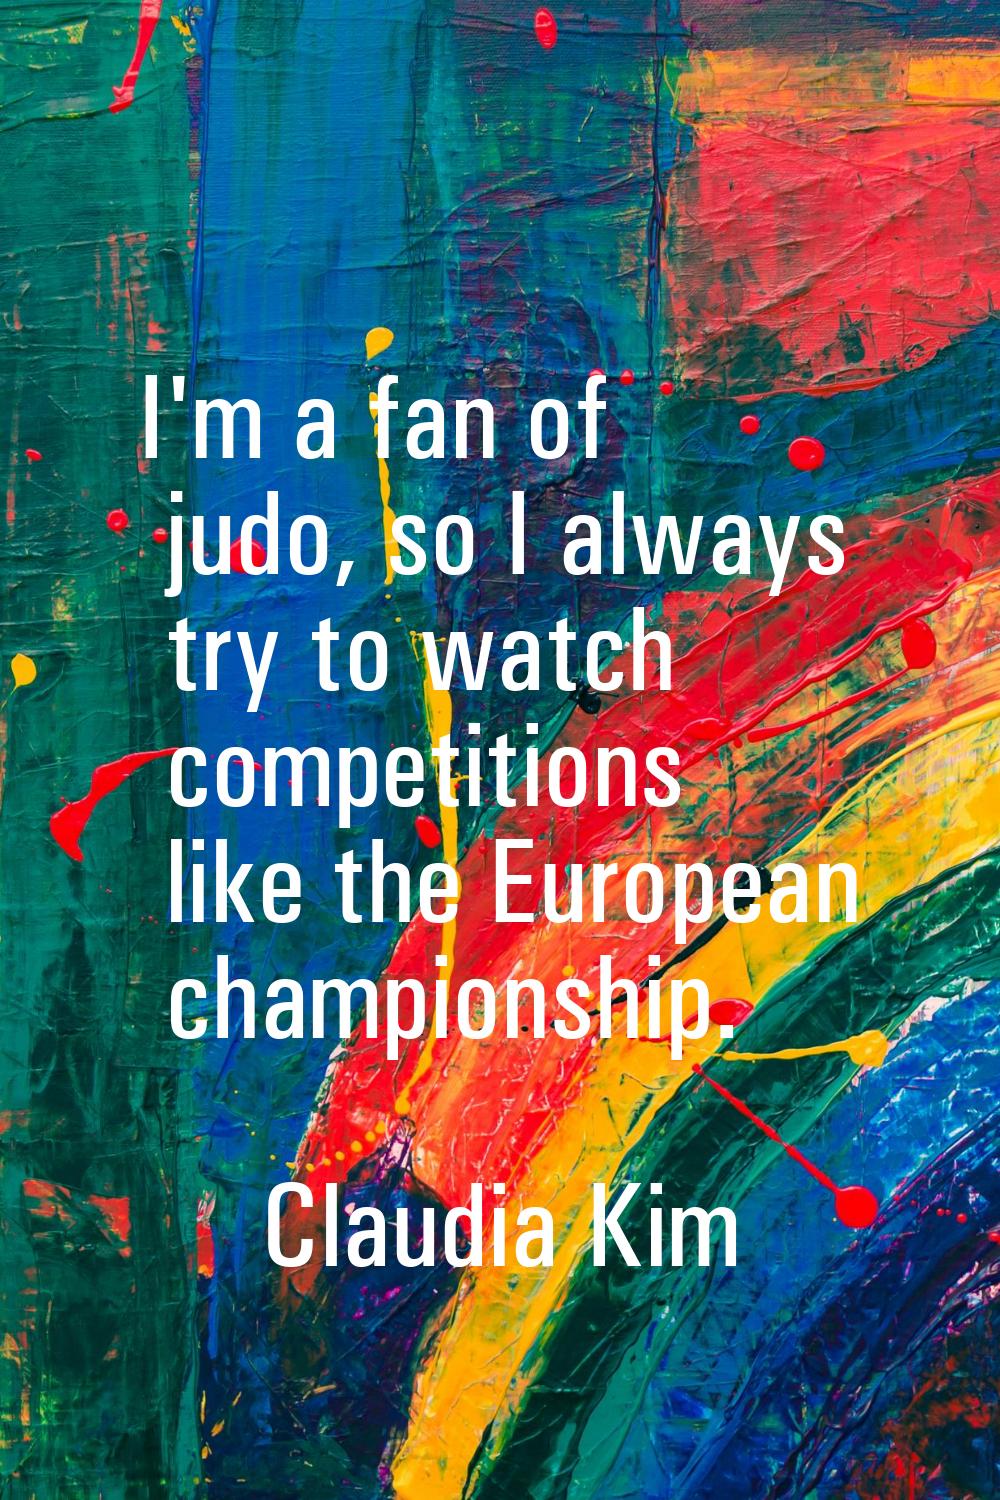 I'm a fan of judo, so I always try to watch competitions like the European championship.